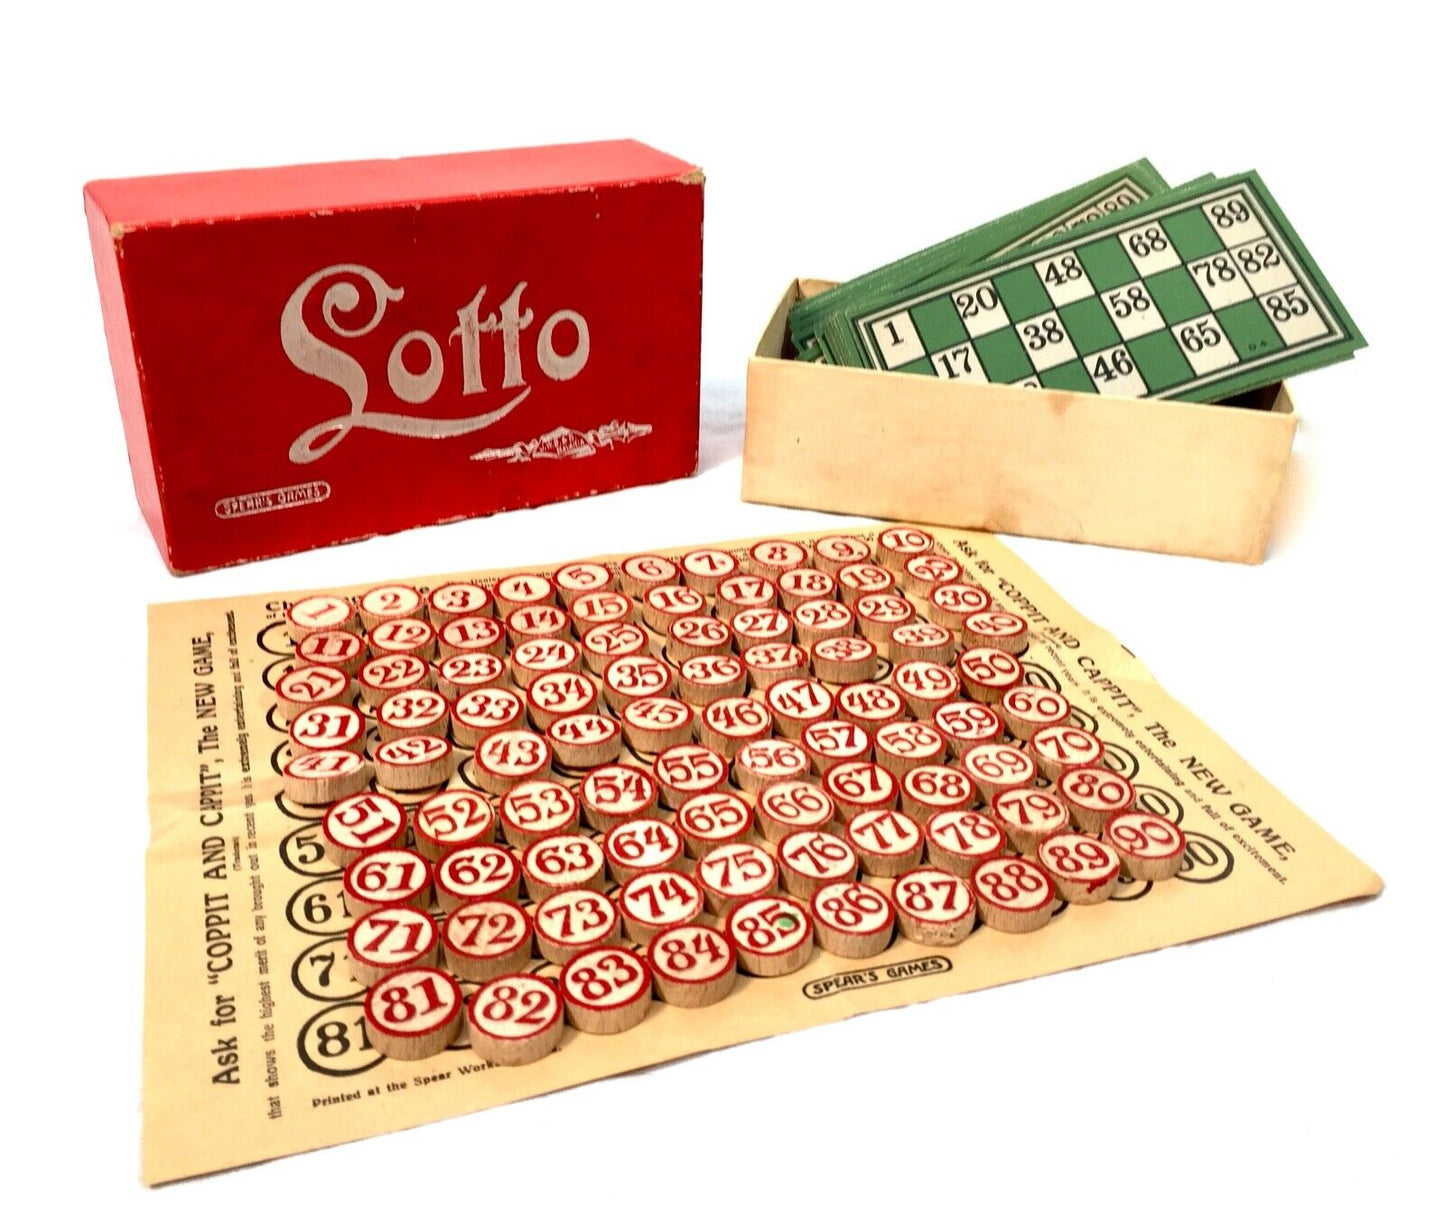 Vintage Lotto Board Game by Spears Games - J W Spear & Sons / Boxed & Complete